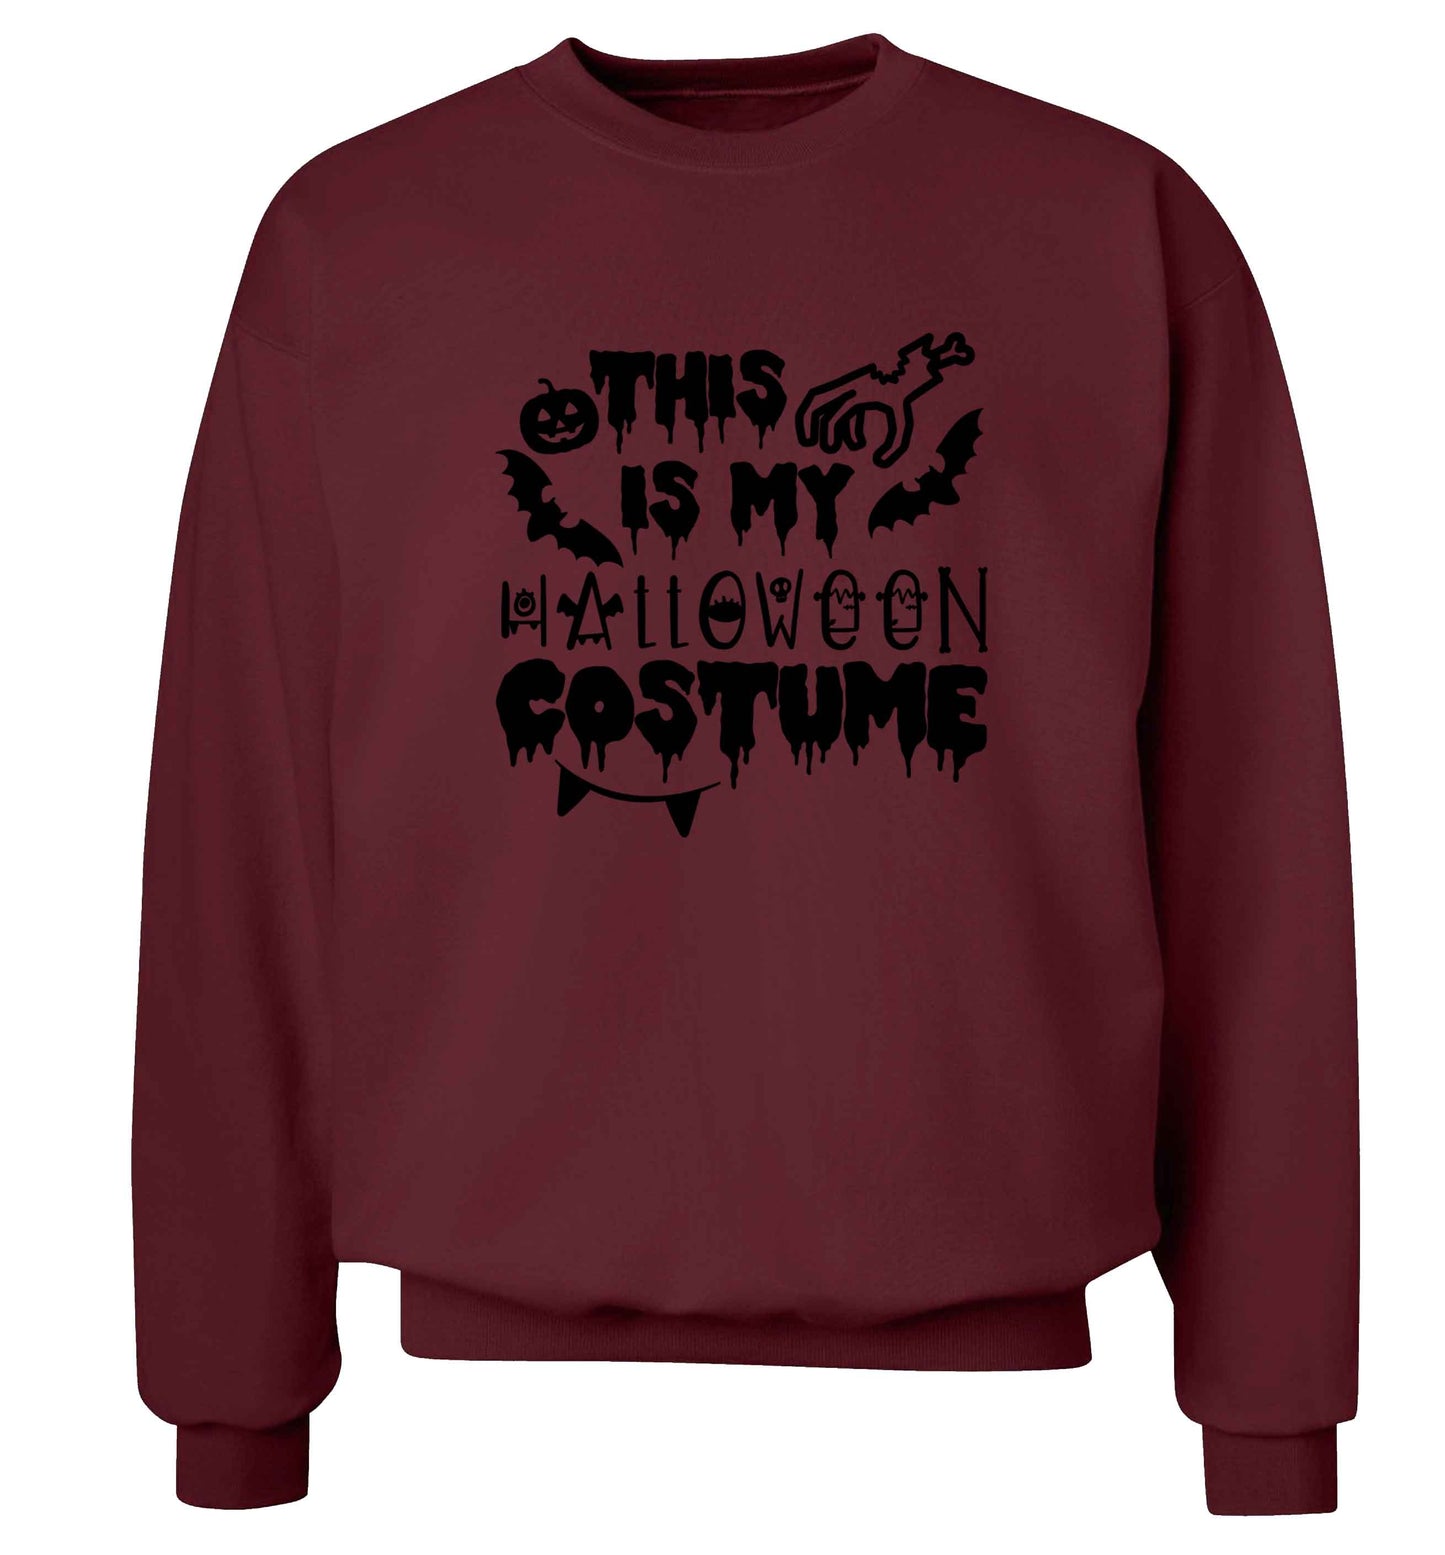 This is my halloween costume adult's unisex maroon sweater 2XL